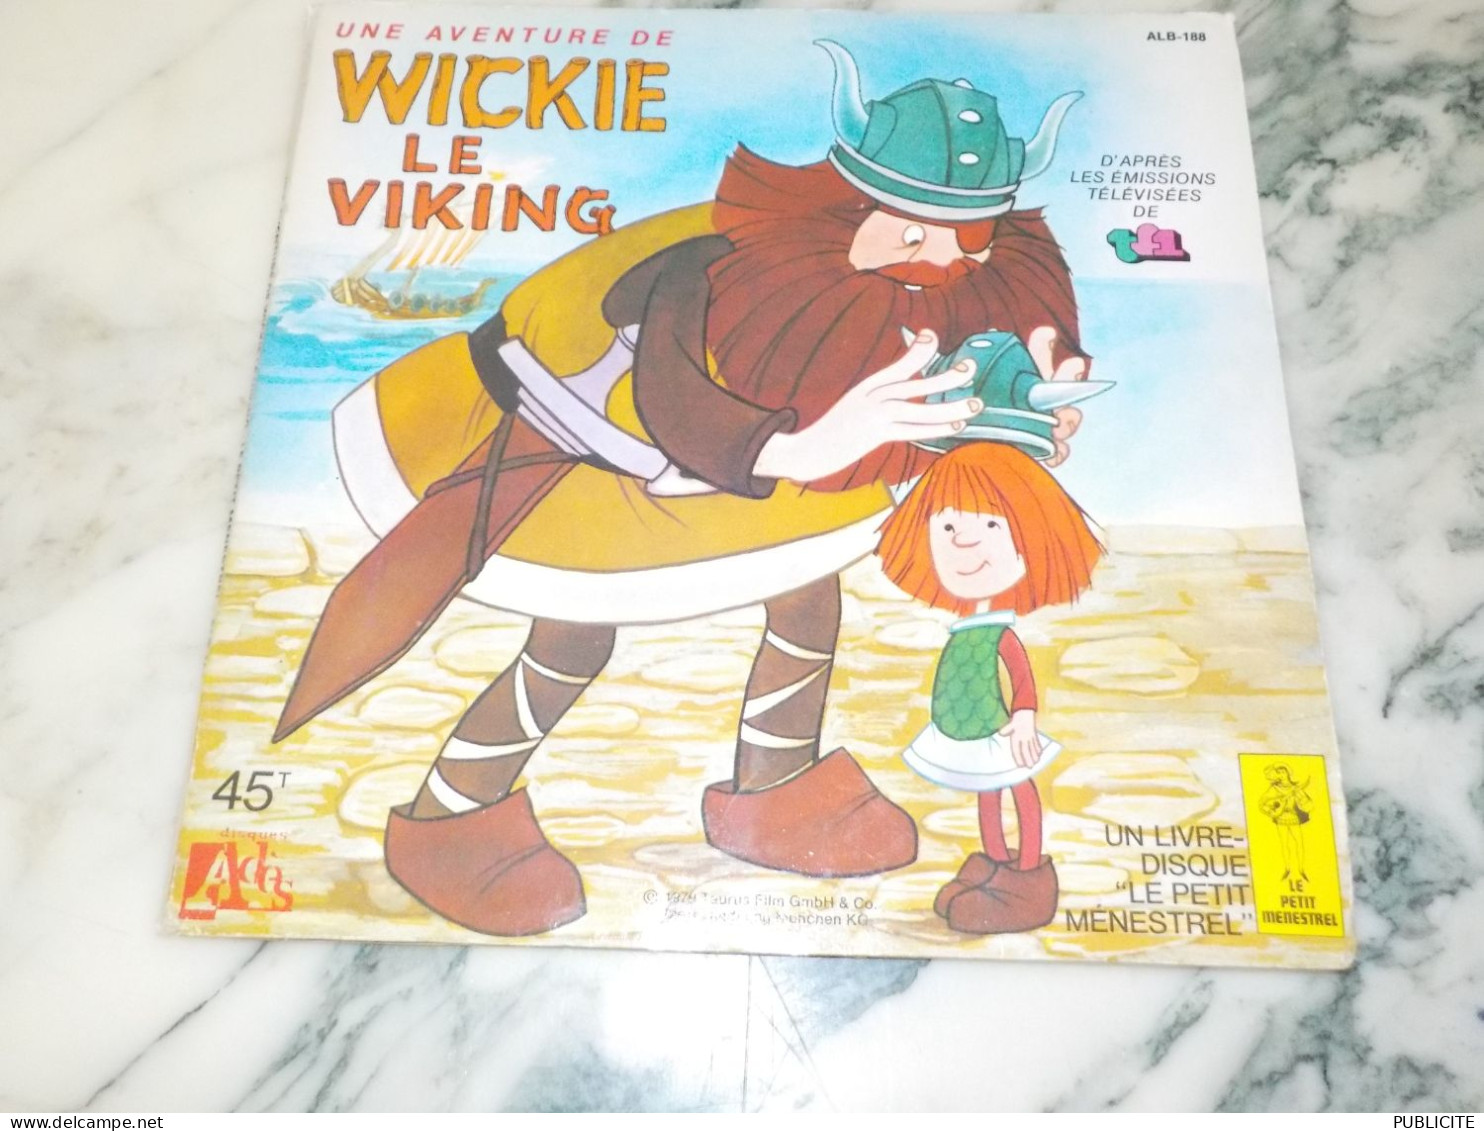 45 TOURS WICKIE LE VIKING 1979 - Kinderen